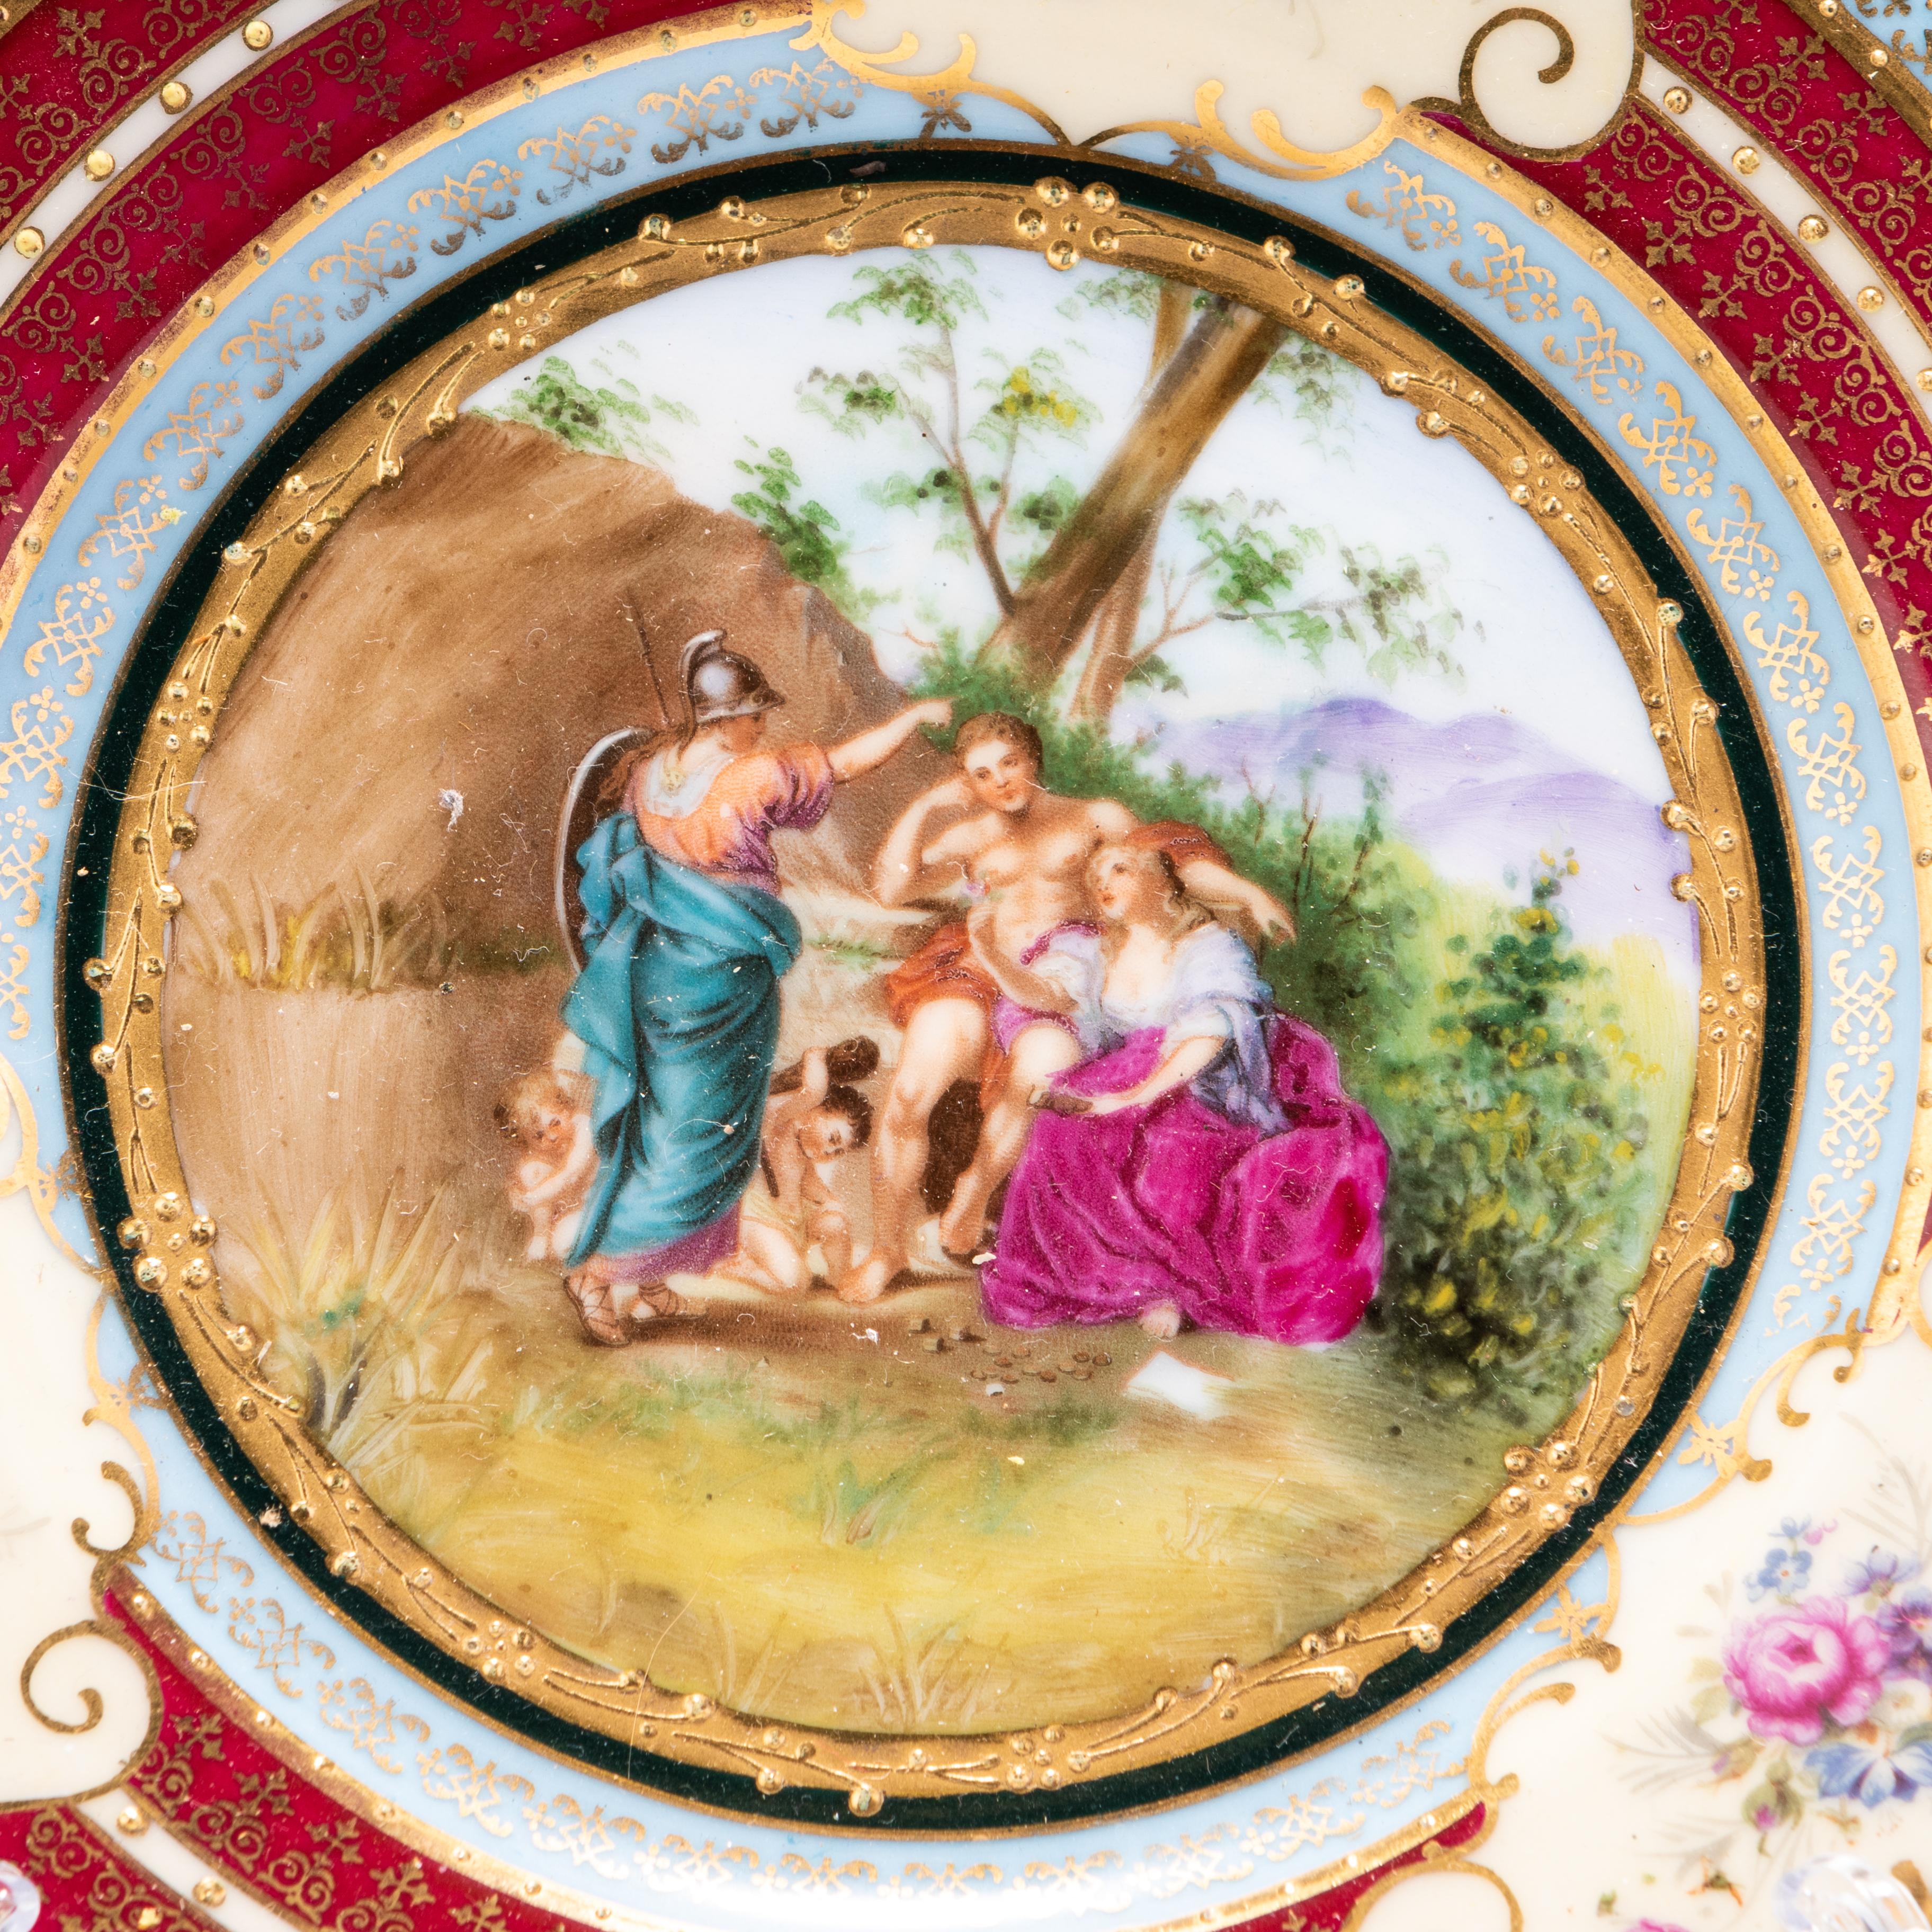 Royal Vienna Gilt Enamel Porcelain Cabinet Plate 19th Century 
Very good condition, marked on base
From a private collection
Free international shipping